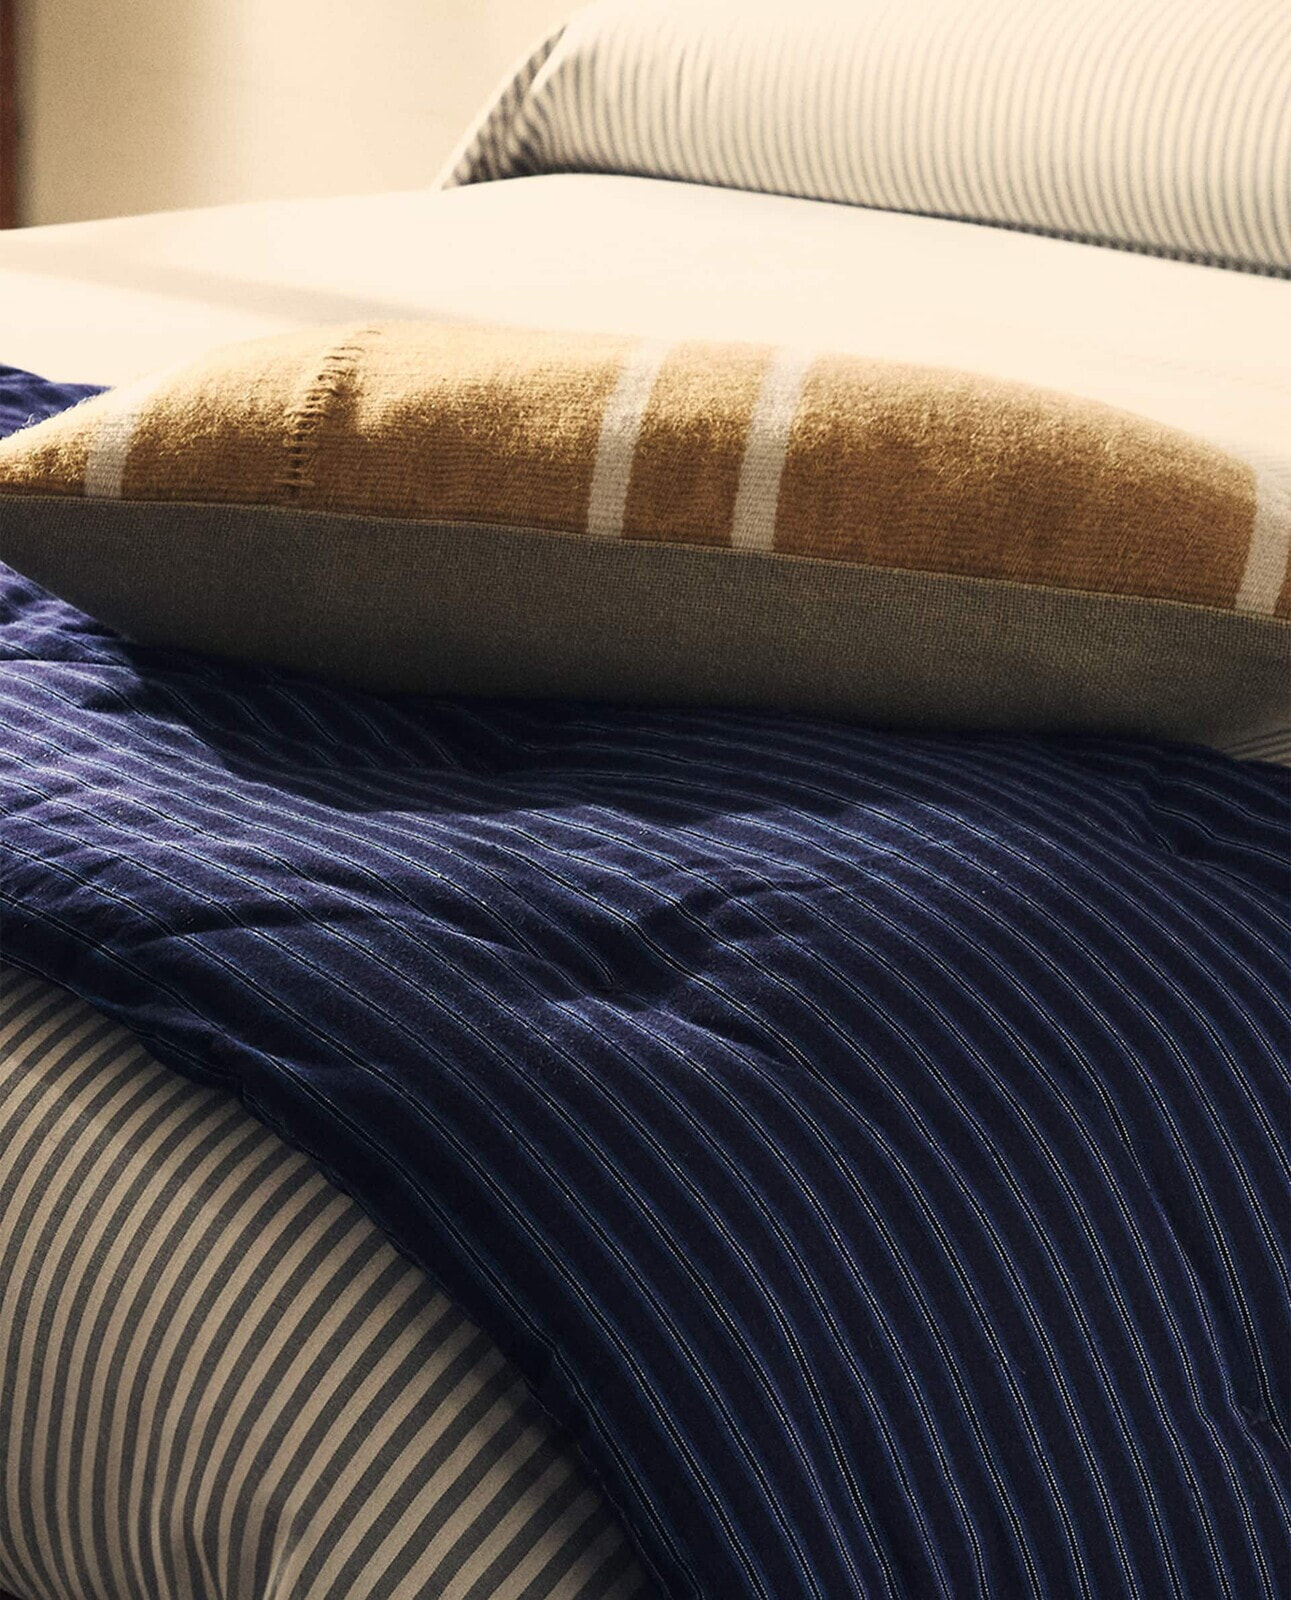 Duvet cover with narrow stripes